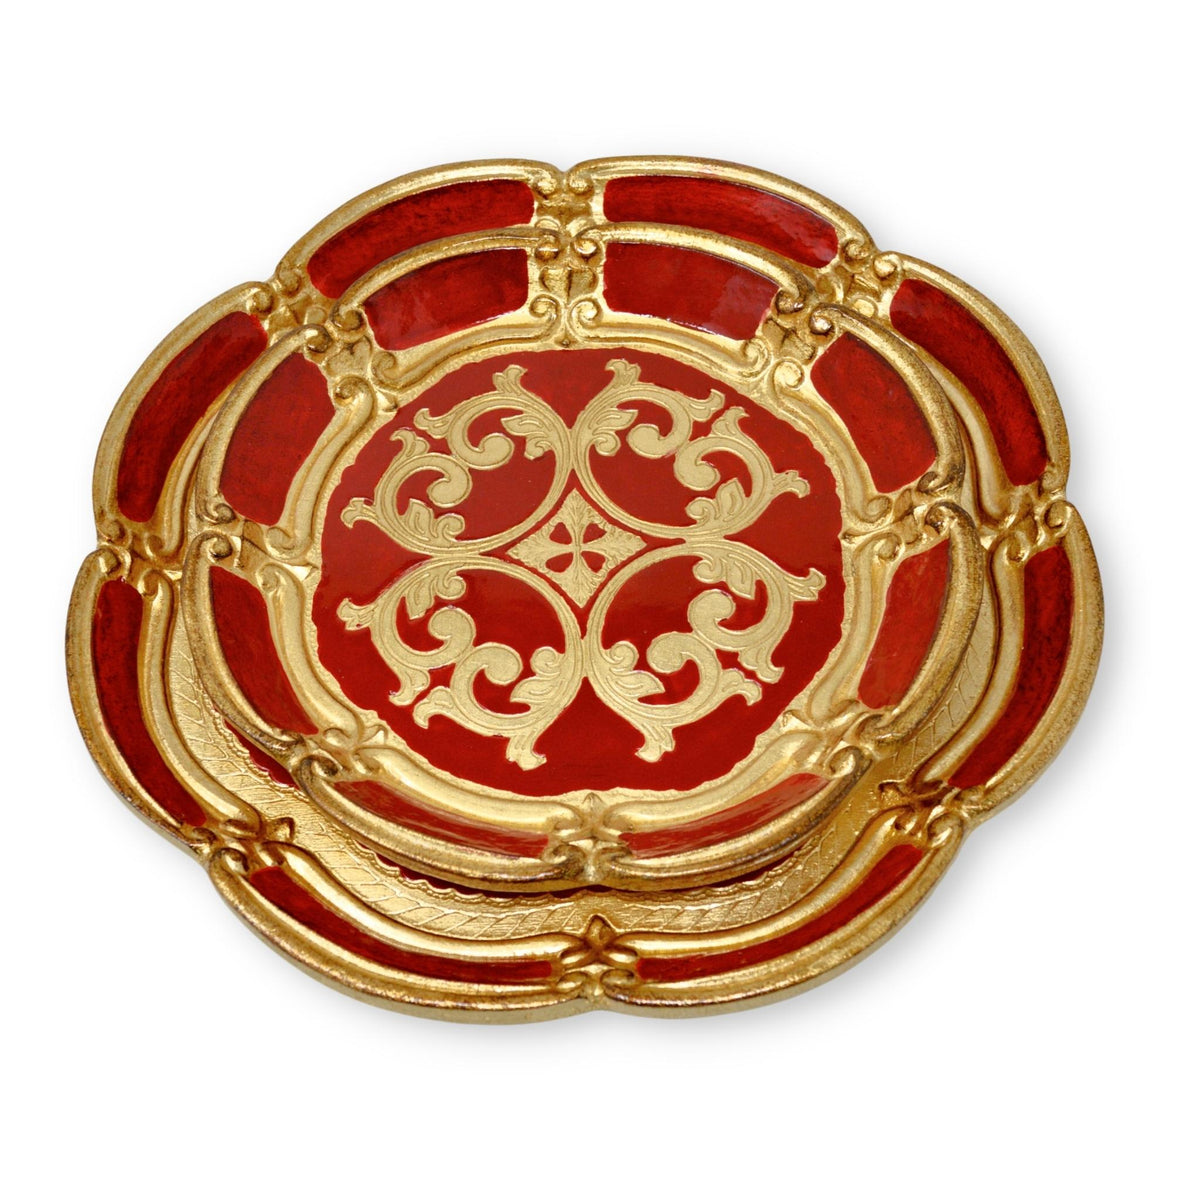 Florentine Carved Gilded Wood Round Tray, Set of 2, Made in Italy - My Italian Decor